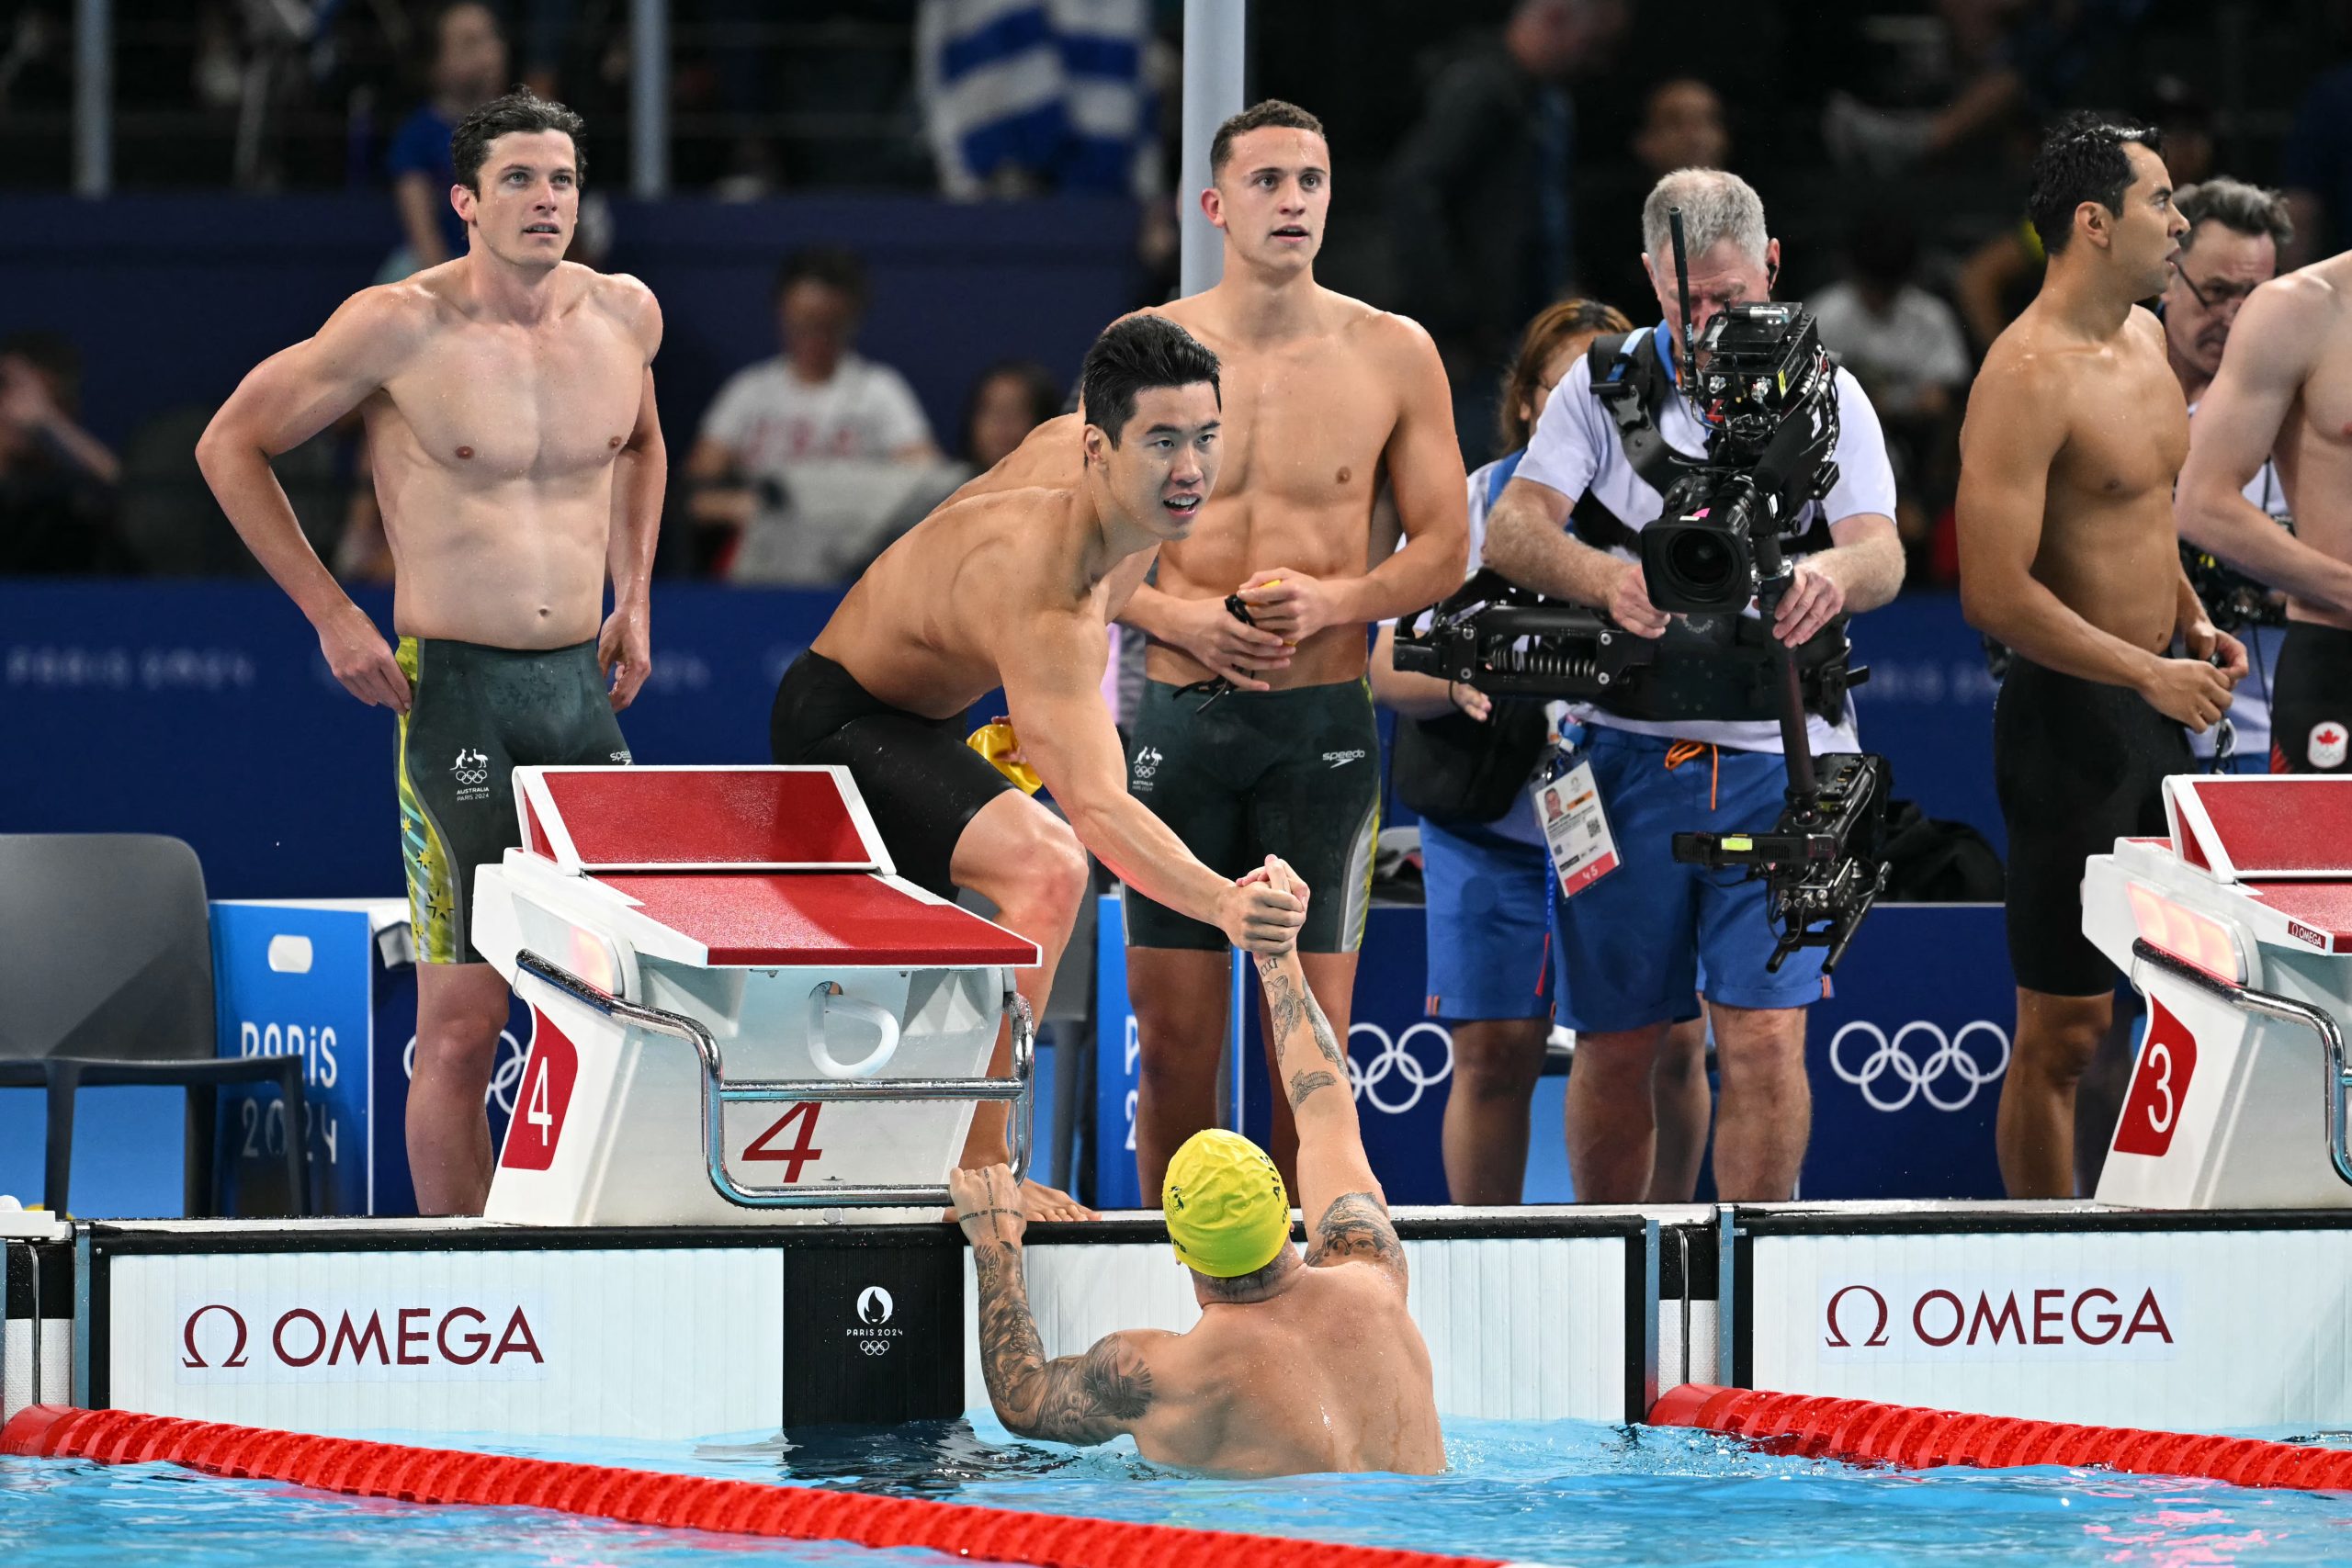 (From L) Australia's Jack Cartwright, Australia's William Yang, Australia's Kyle Chalmers and Australia's Flynn Southam react after winning a heat of the men's 4x100m freestyle relay swimming event at the Paris La Defense Arena in Nanterre, west of Paris, on July 27, 2024. (Photo by Jonathan NACKSTRAND / AFP) (Photo by JONATHAN NACKSTRAND/AFP via Getty Images)